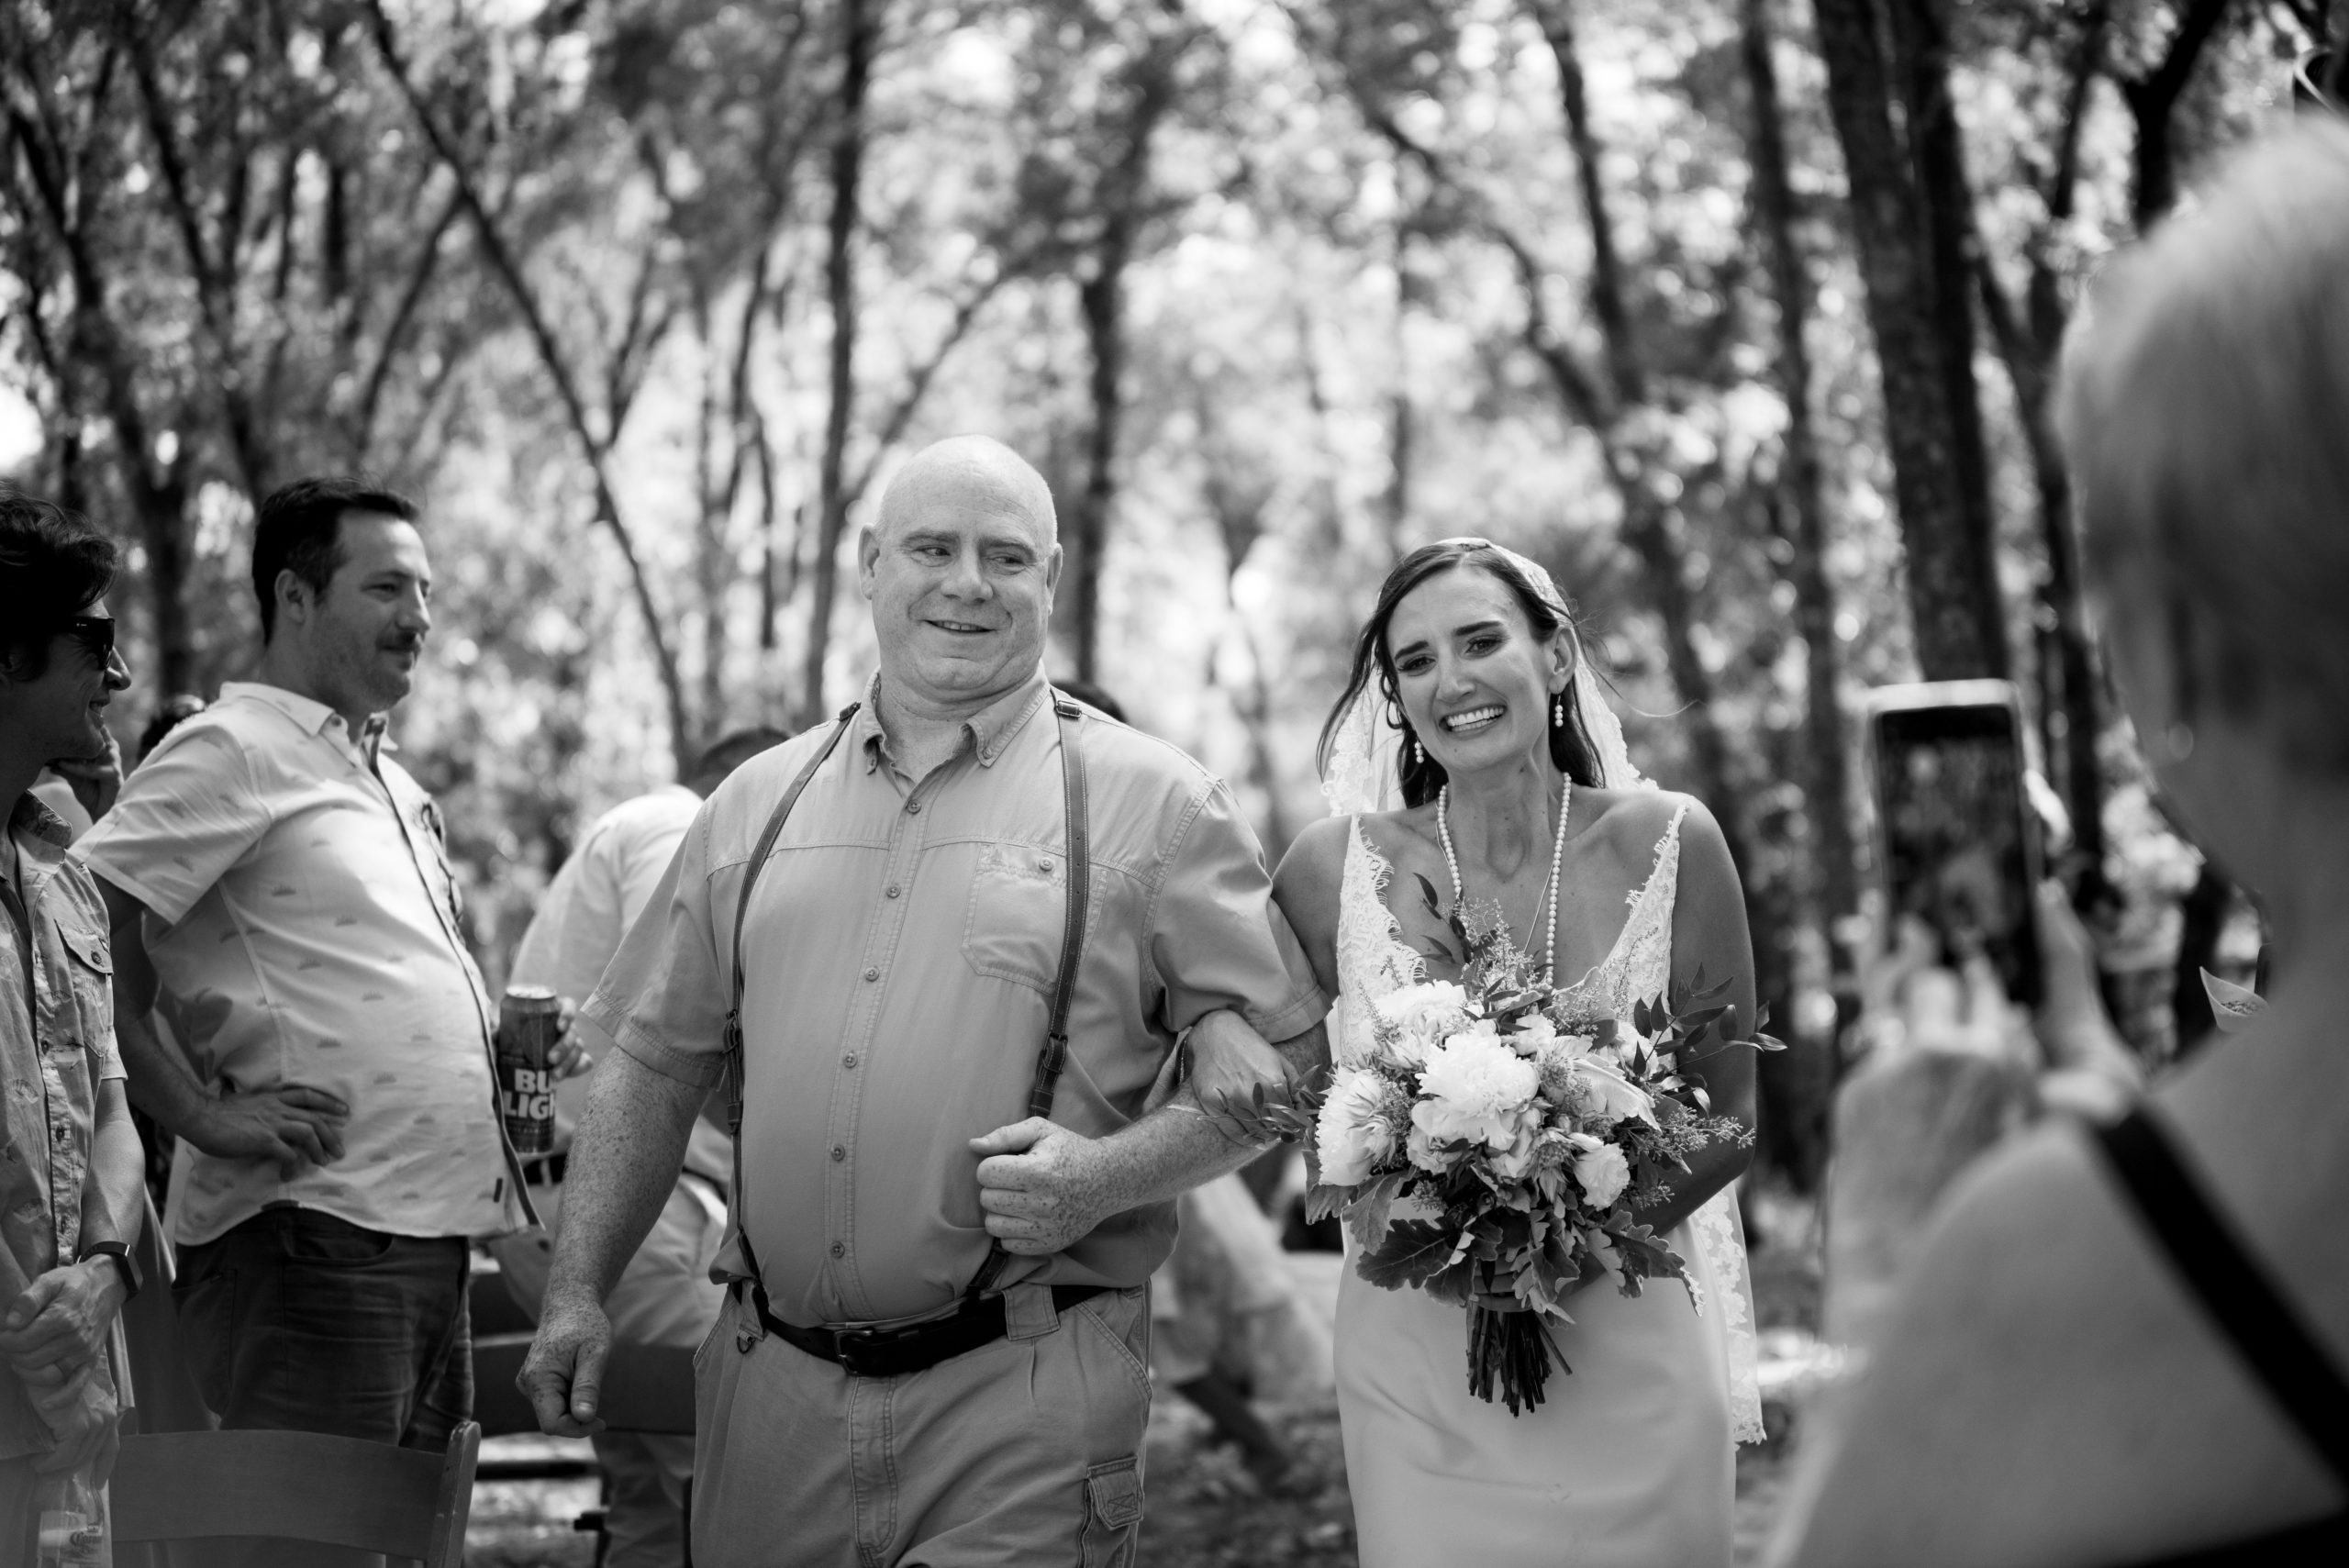 Wedding Ceremony at Rees Lake Spirit of the Suwannee, Live Oak Florida, Black Tie and Co.